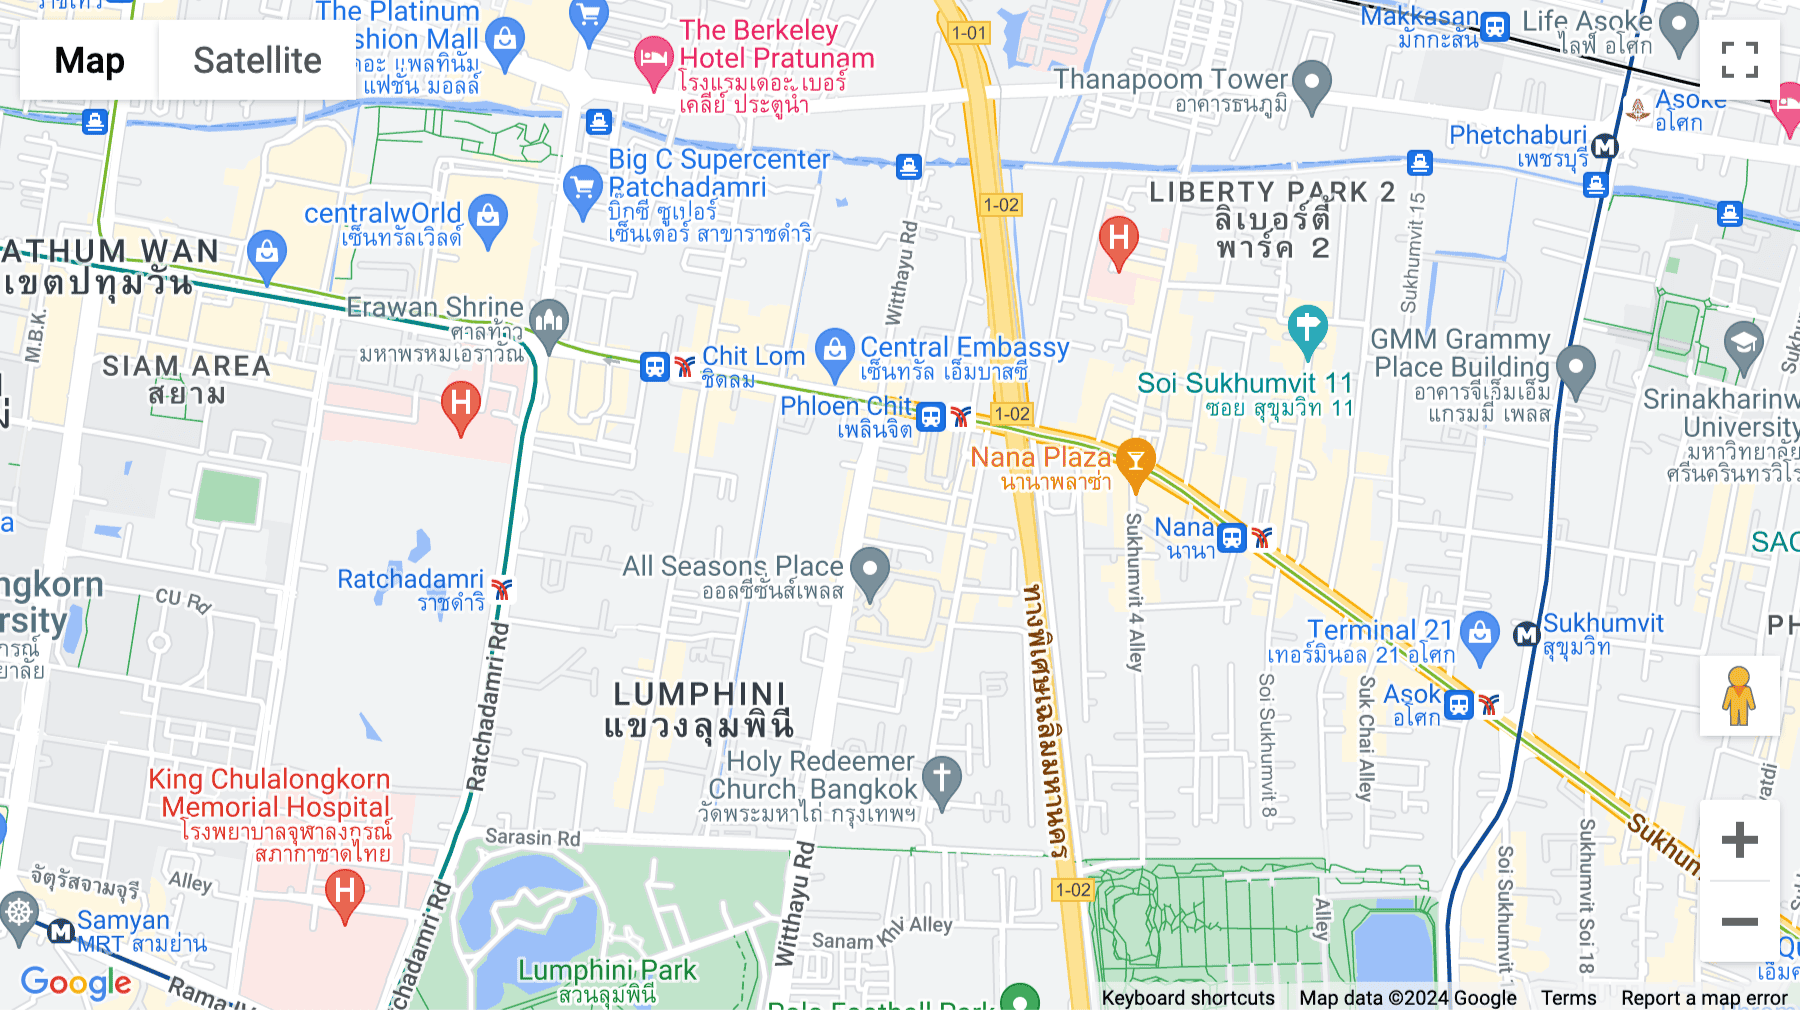 Click for interative map of M Thai Tower, Floor 23/F, 87 Wireless Road, Bangkok